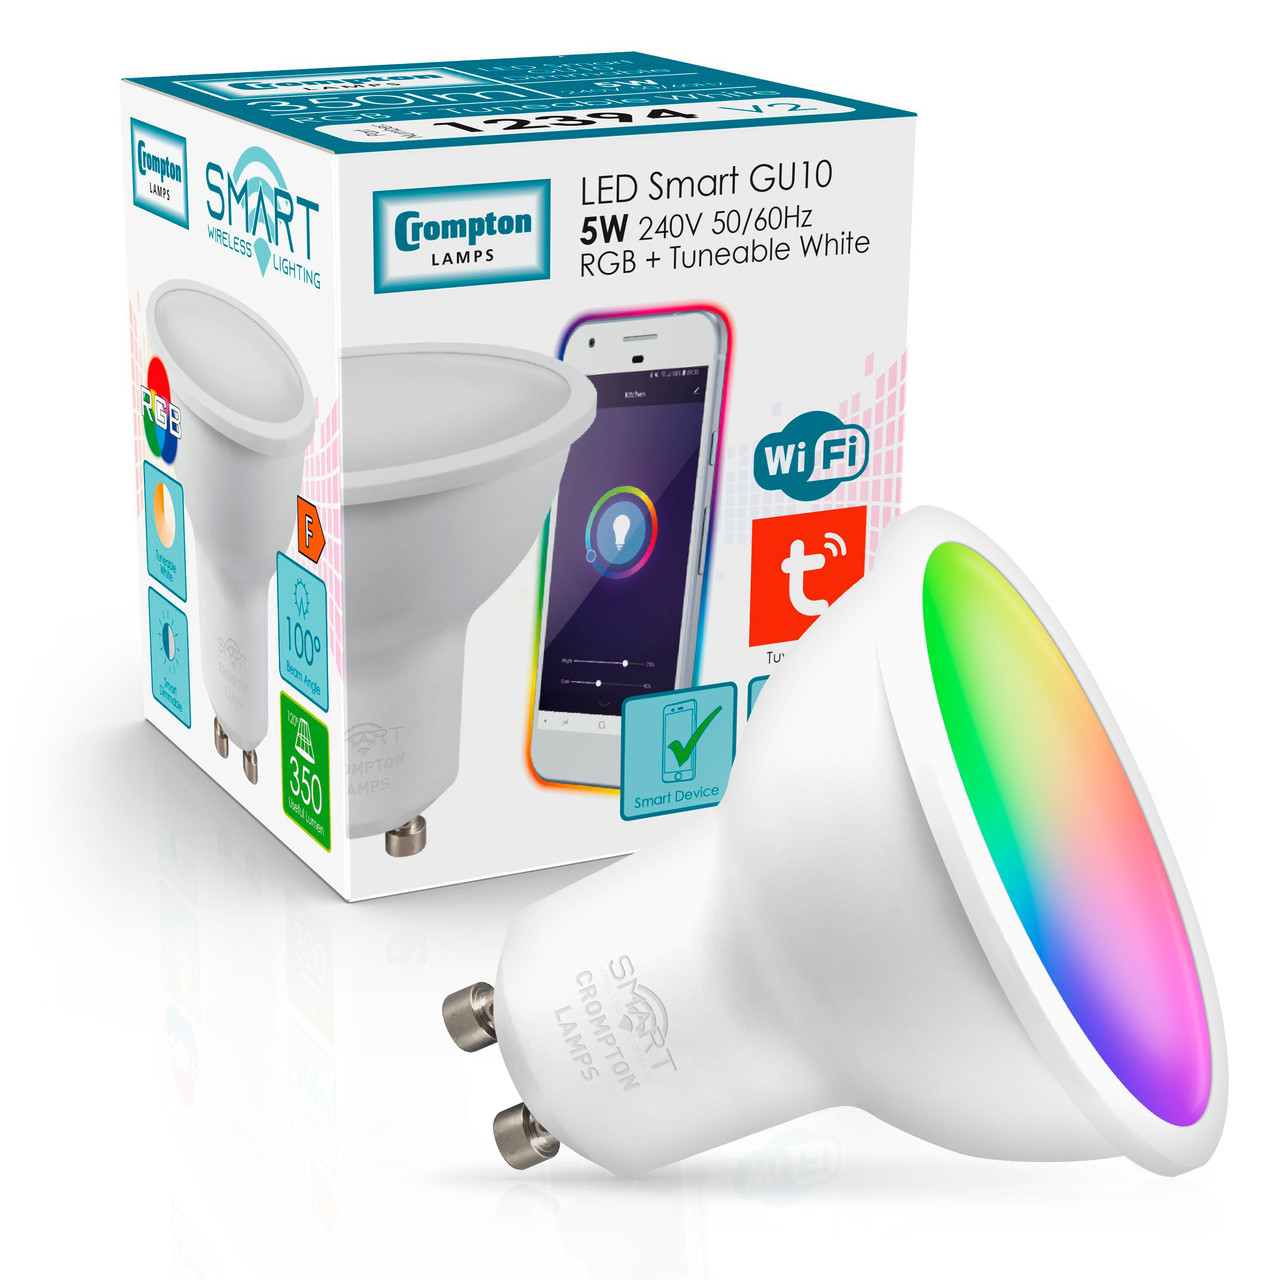 Photos - Light Bulb Crompton Lamps LED Smart Wifi GU10 Bulb 5W Dimmable RGB and Tuneable White 